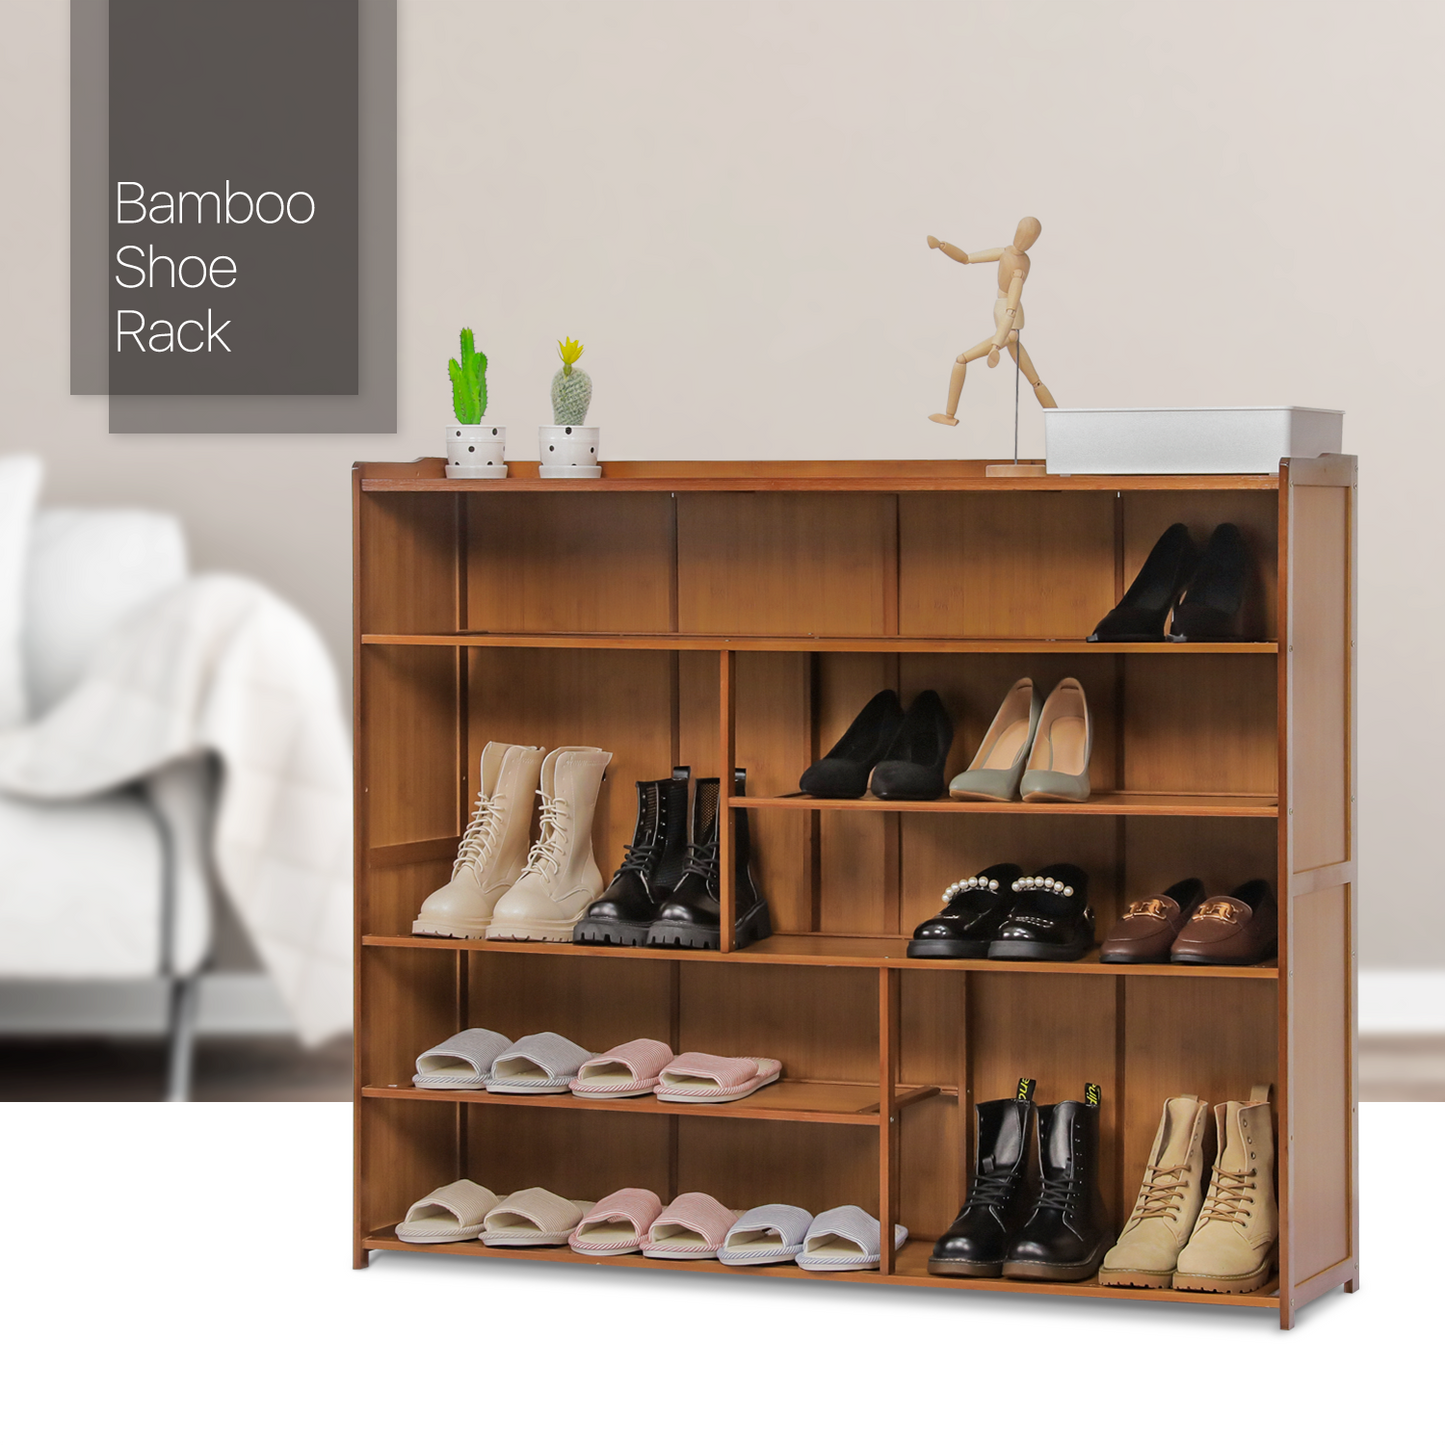 Shoe Organizer - Enclosed Back Panel with Boots Storage - 6 Tier - Brown